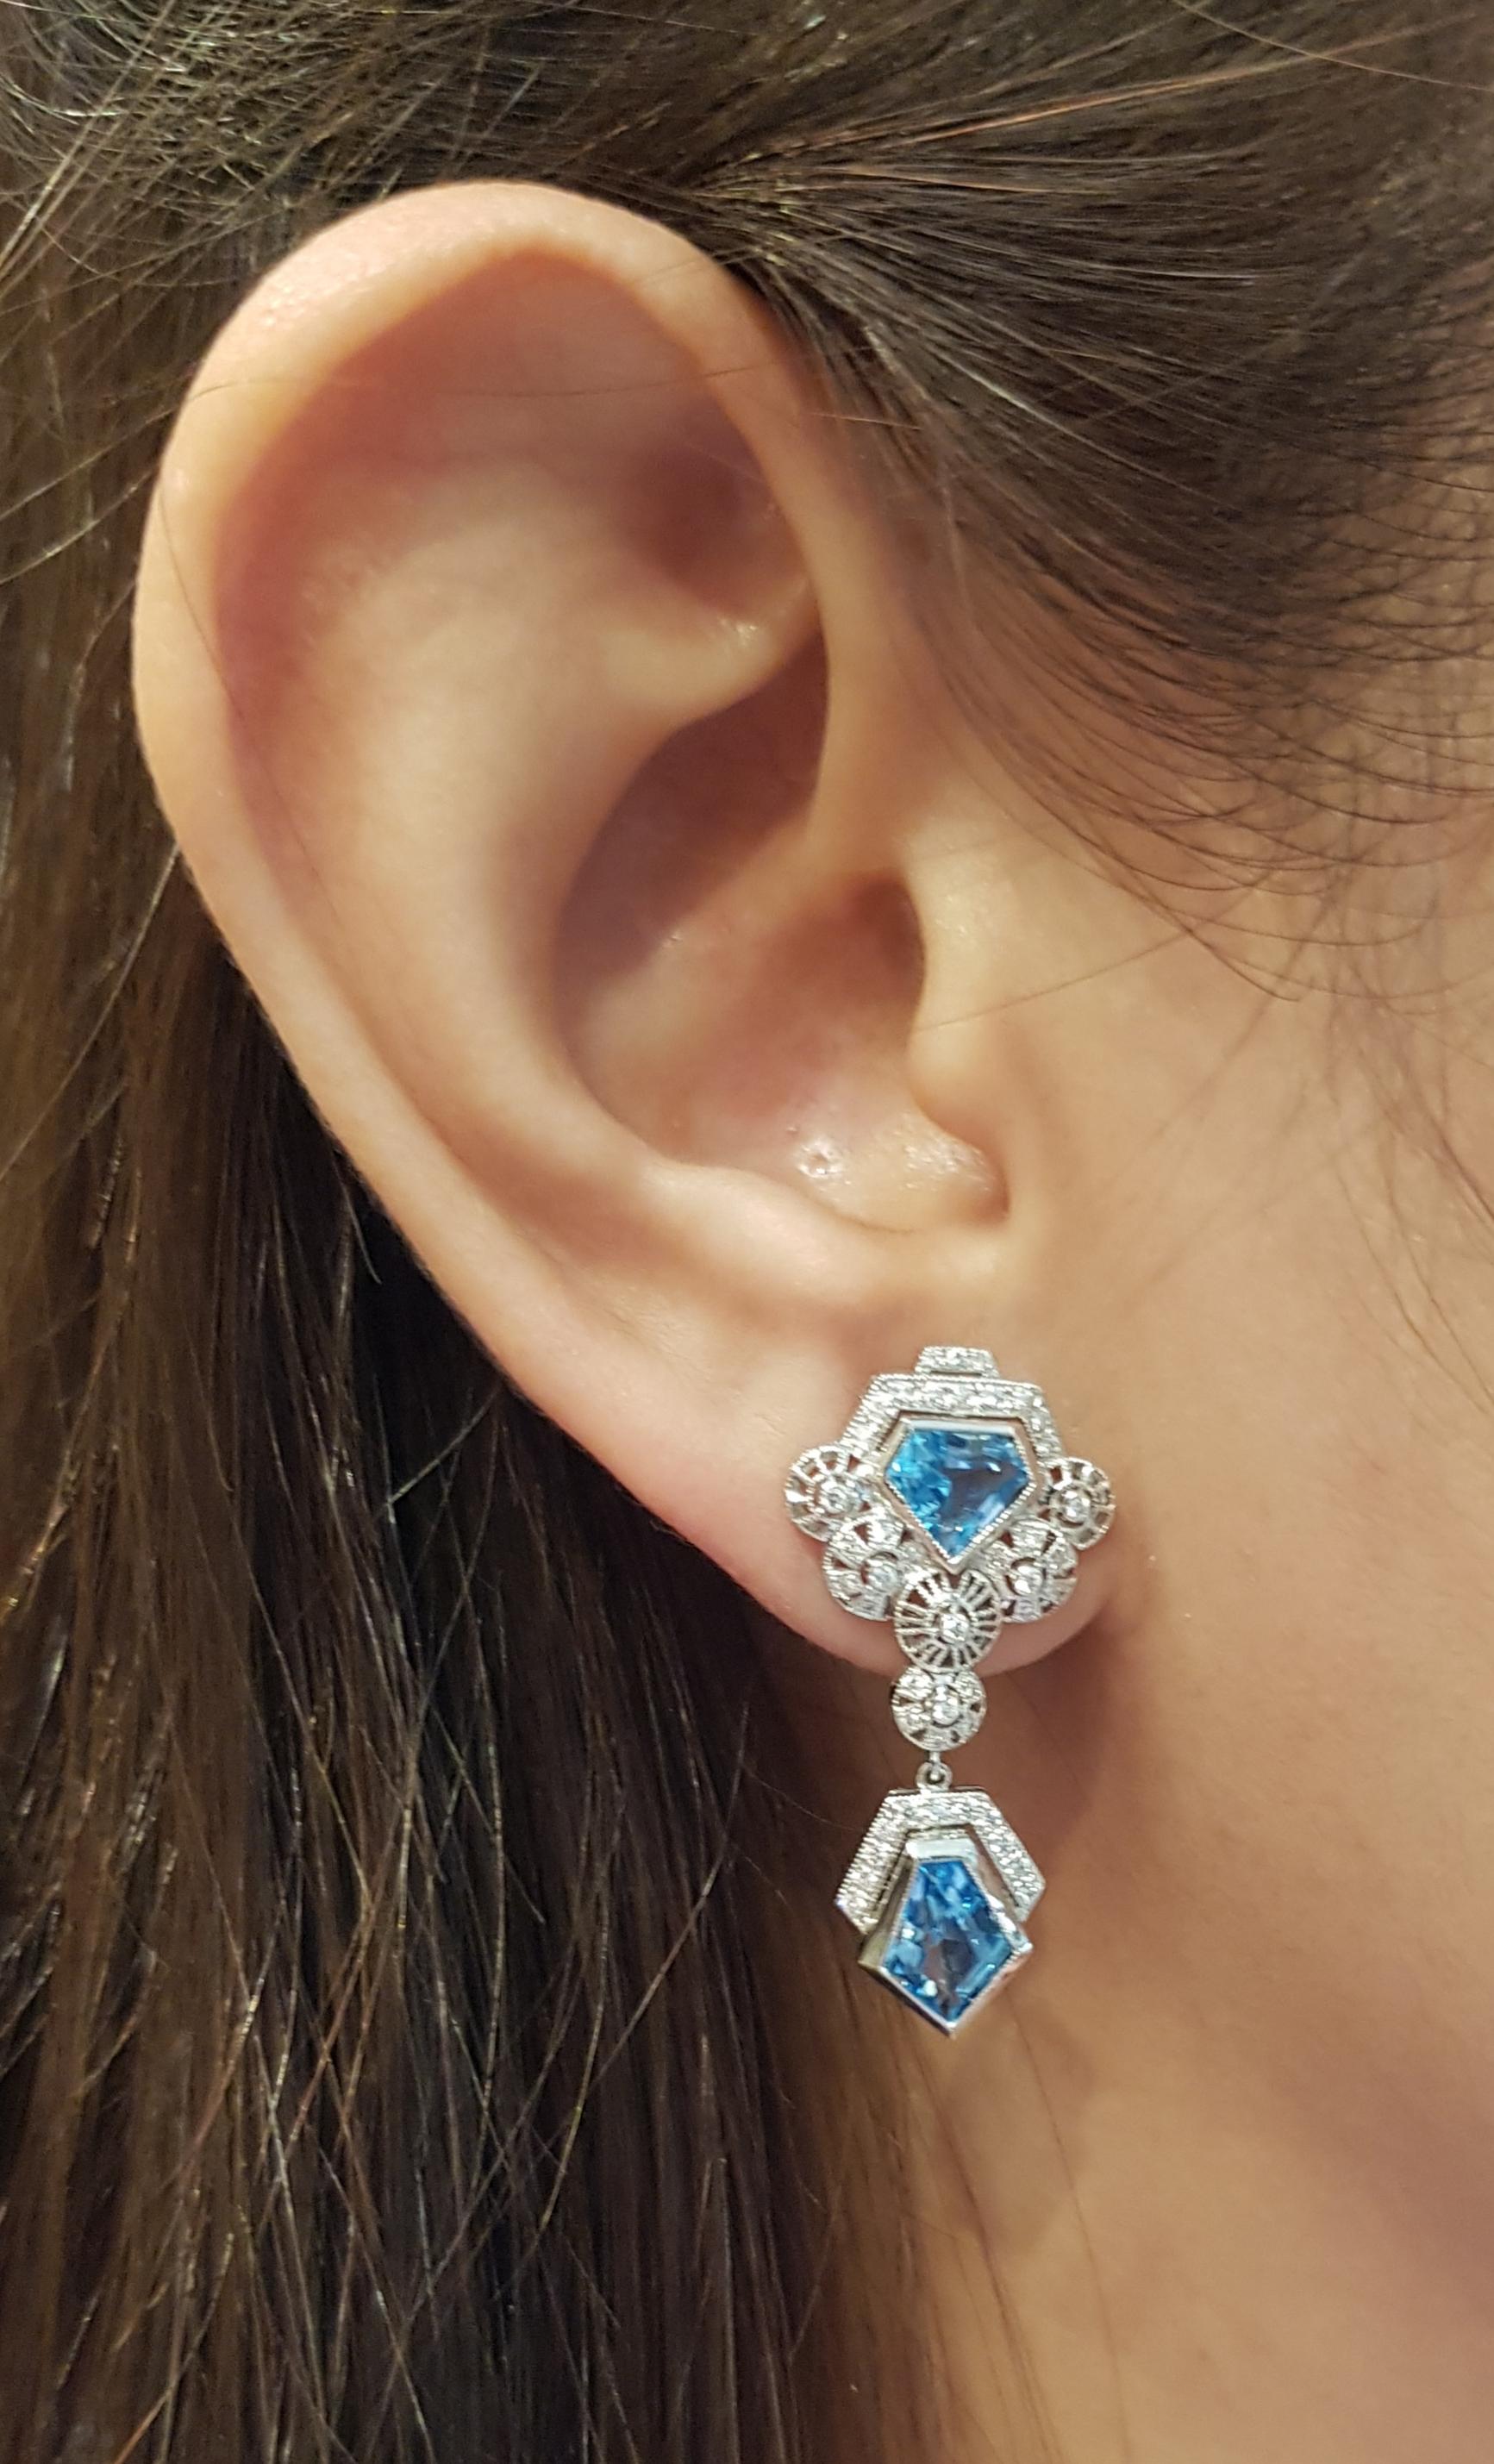 Blue Topaz 4.0 carats with Diamond 0.32 carat Earrings set in 18 Karat White Gold Settings

Width:  1.6 cm 
Length: 3.3 cm
Total Weight: 8.31 grams

